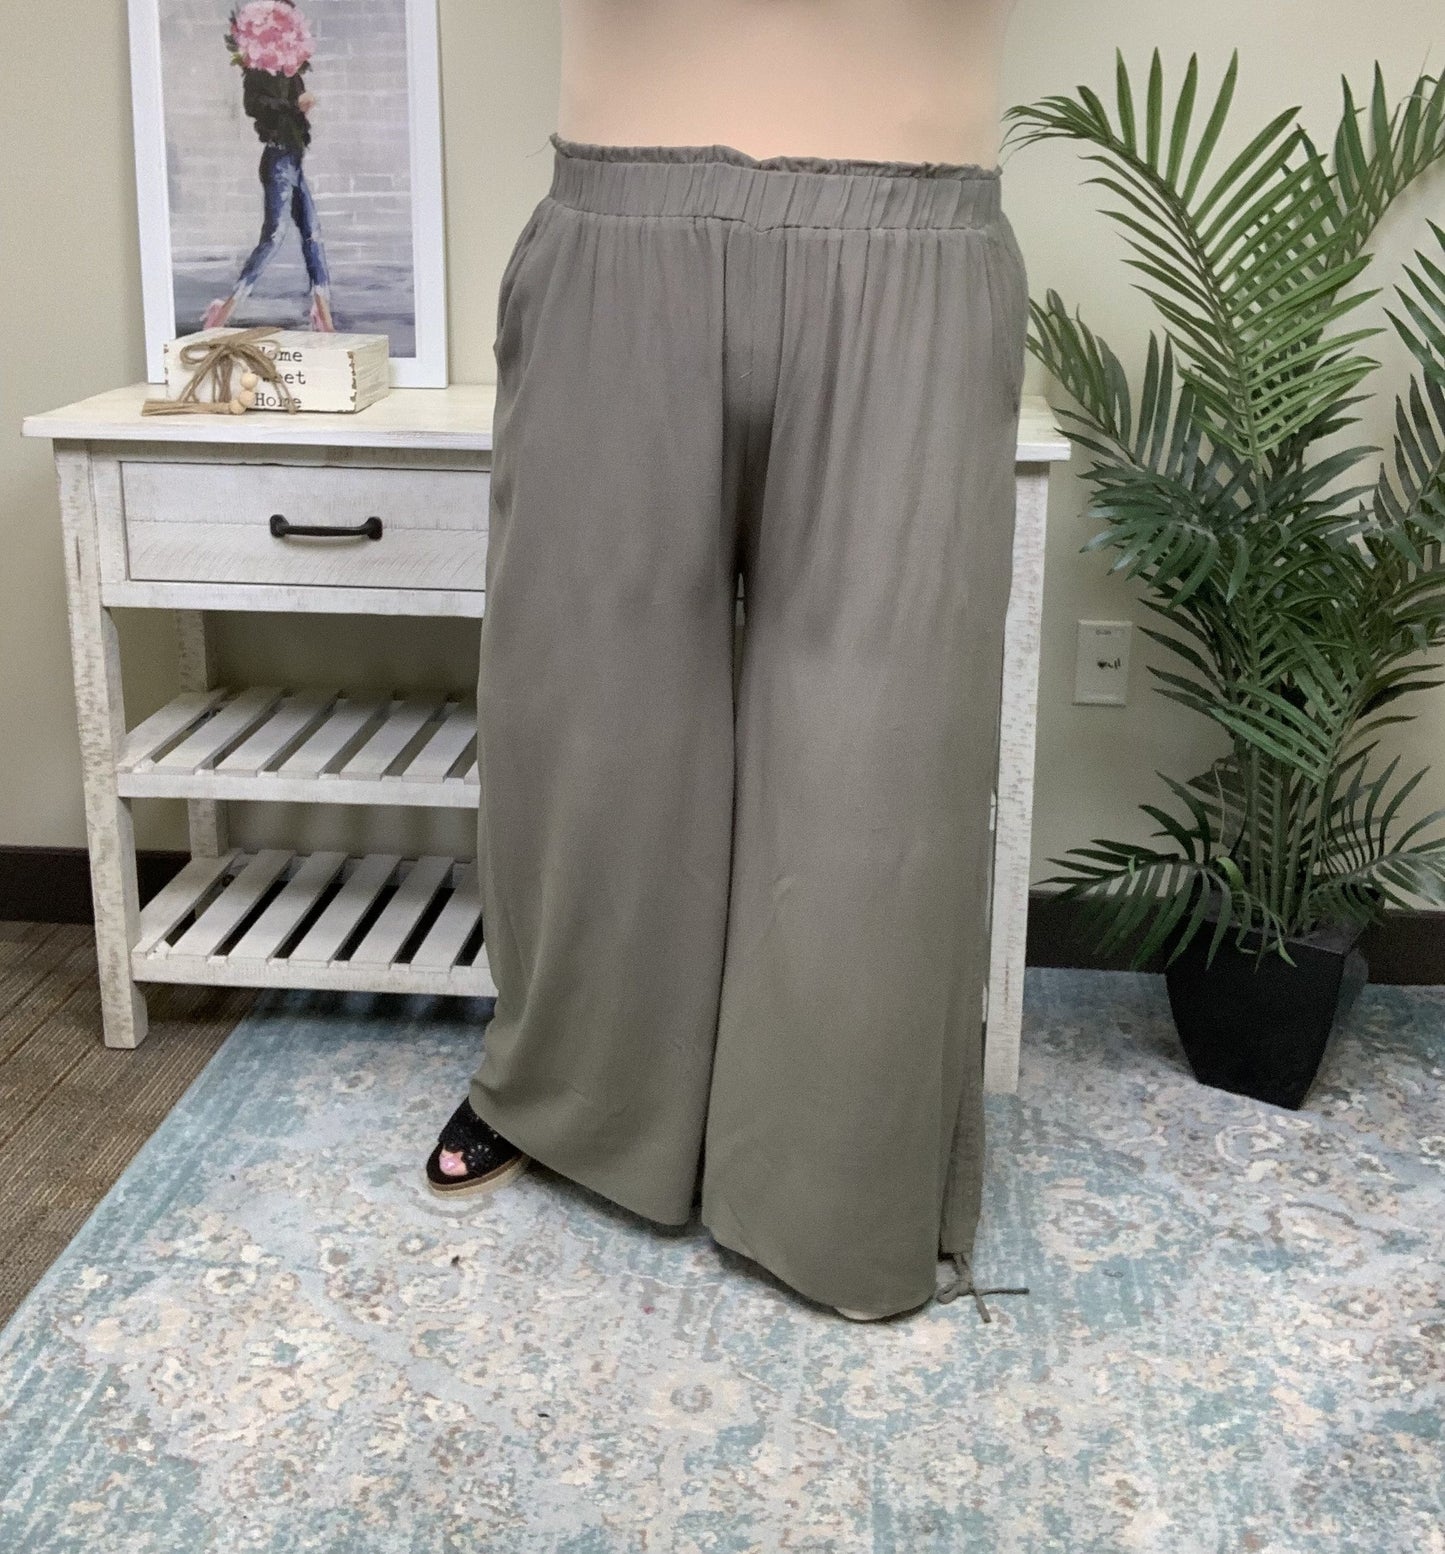 Showing Some Ankle Pants